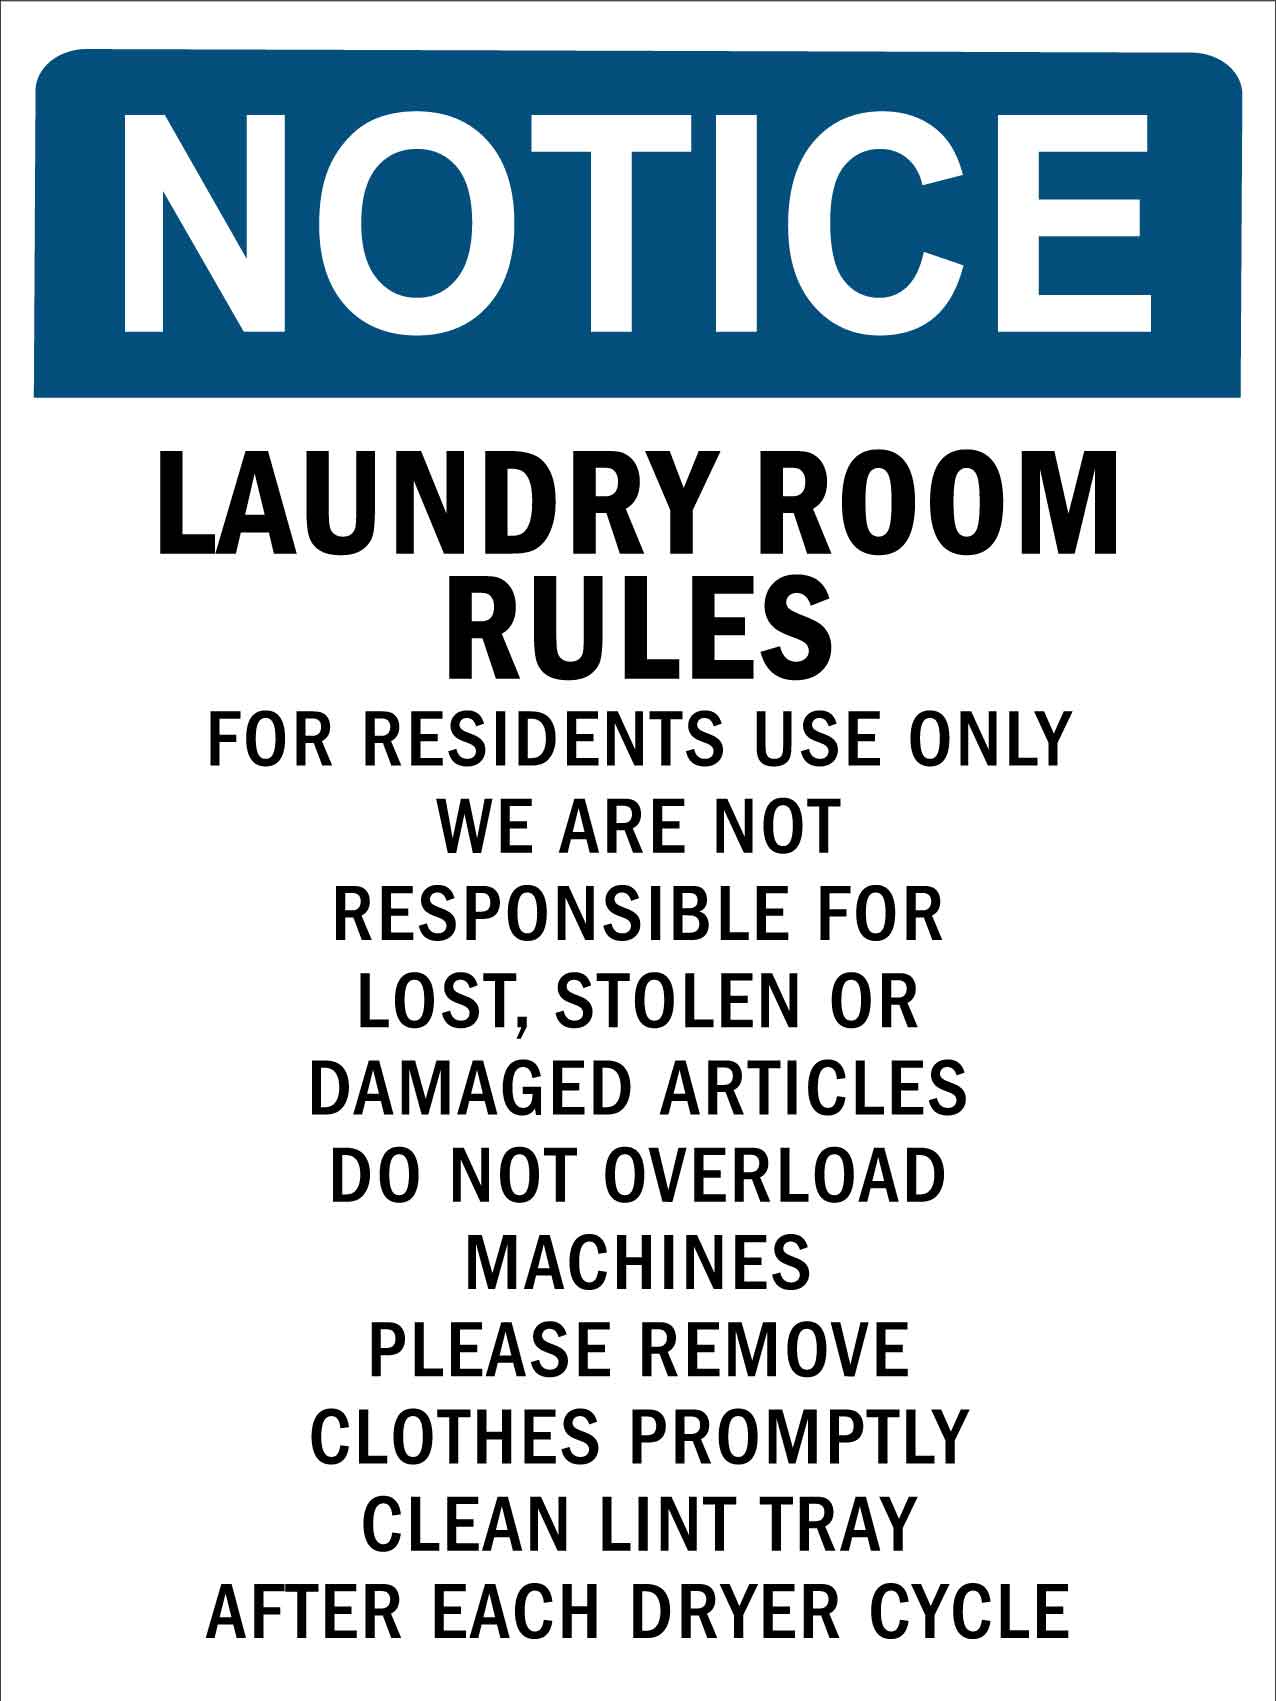 Notice Laundry Room Rules Sign